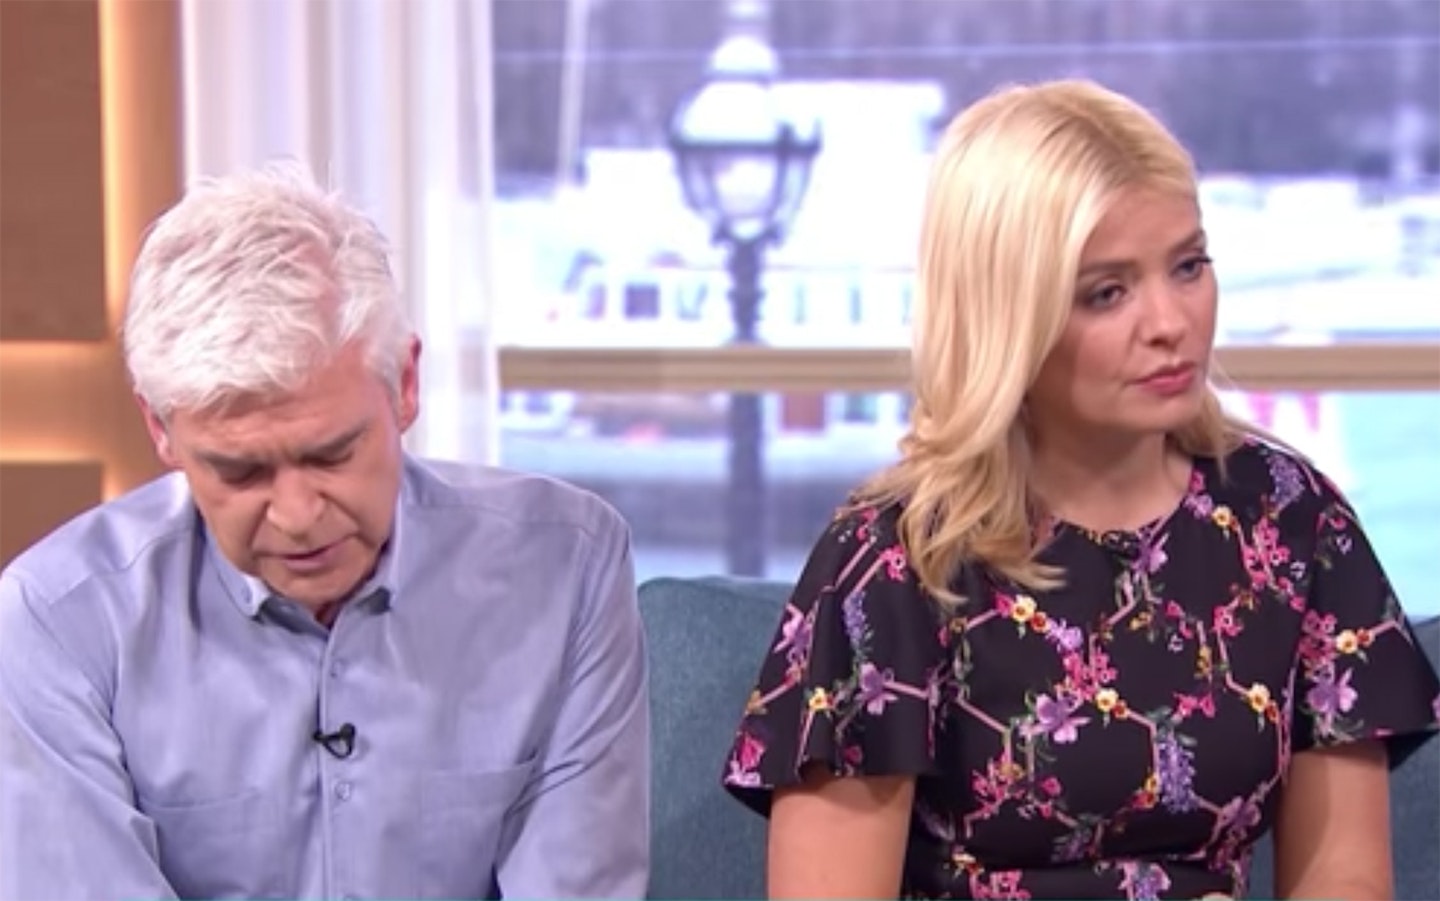 phillip-schofield-holly-willoughby-this-morning-anti-bullying-campaign-be-kind-megan-evans-felix-alexander